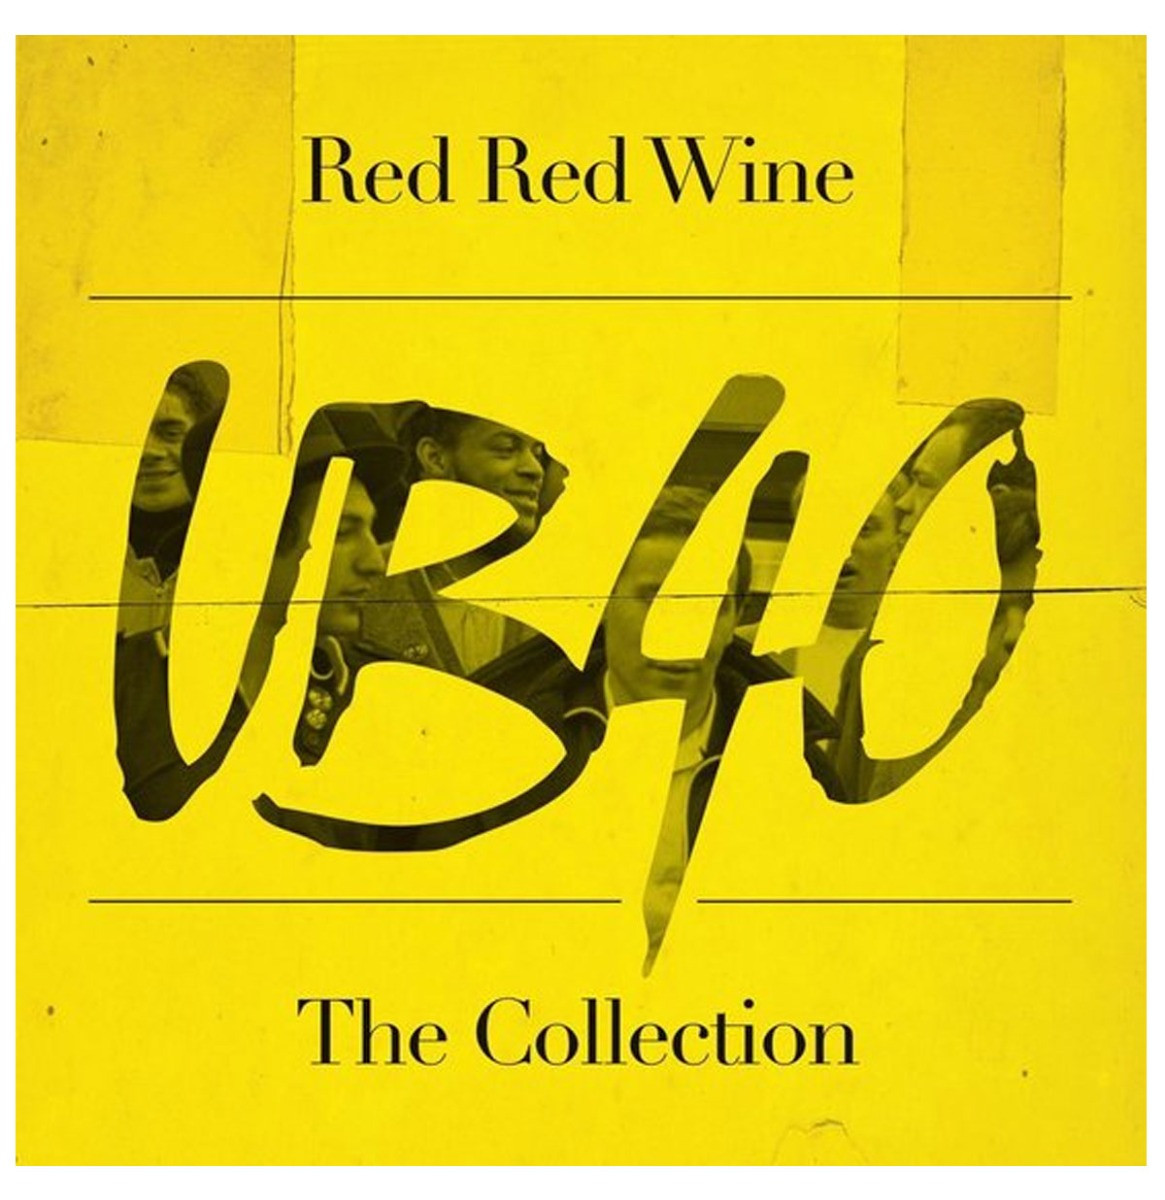 UB40 - Red Red Wine The Collection LP